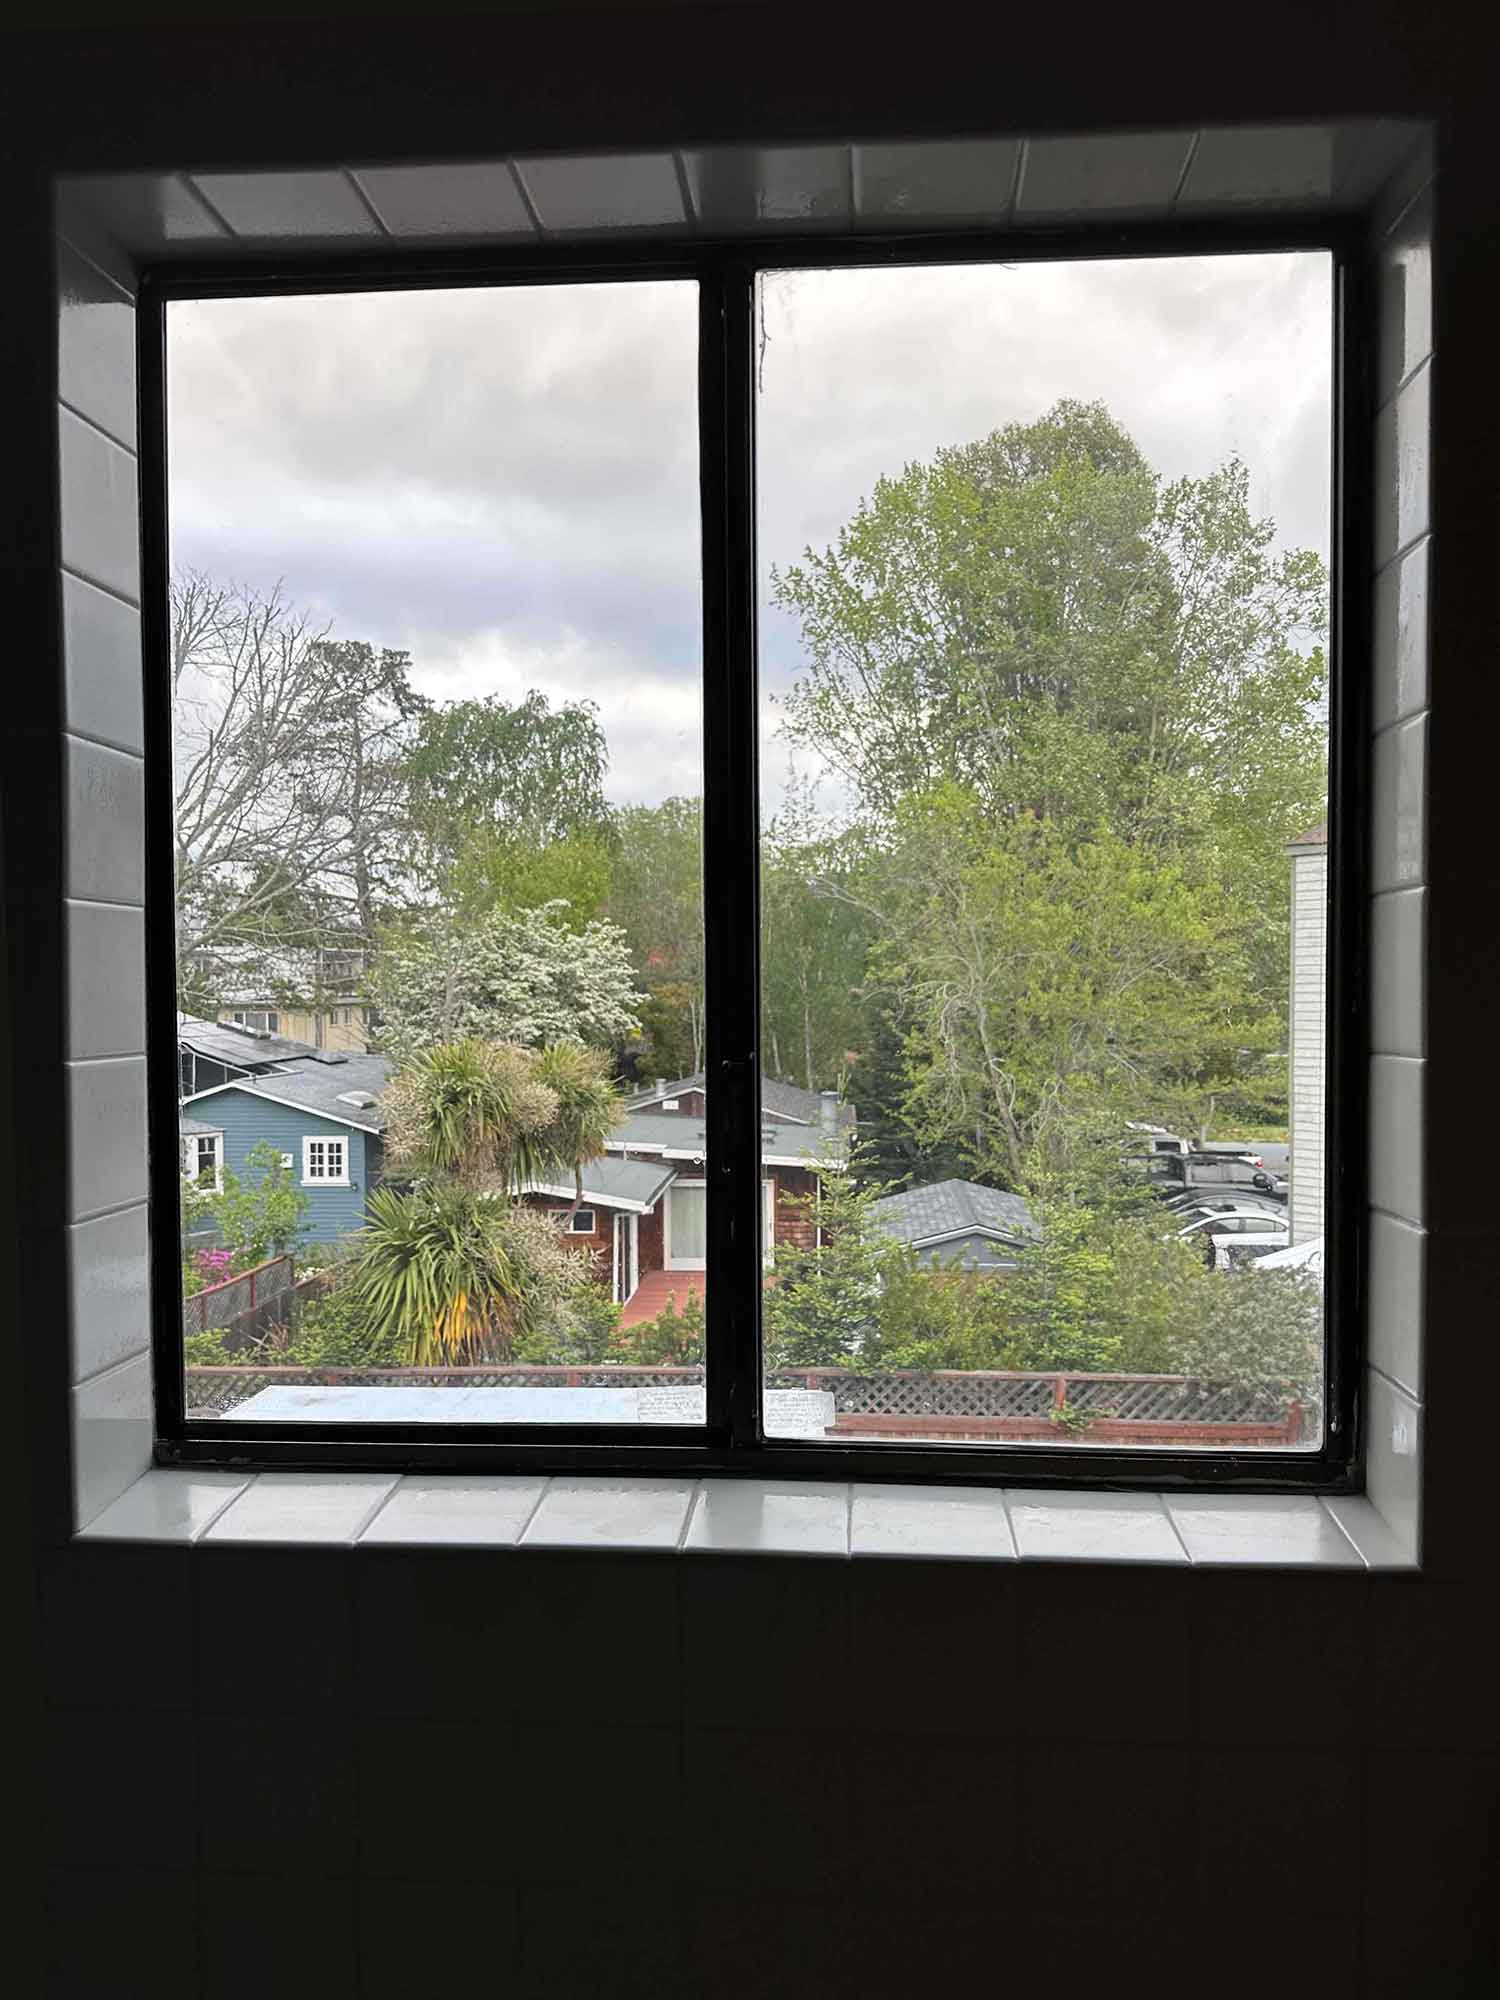 ClimatePro installs Safety Window Film in Mill Valley. Get a free estimate for your MIll Valley home.